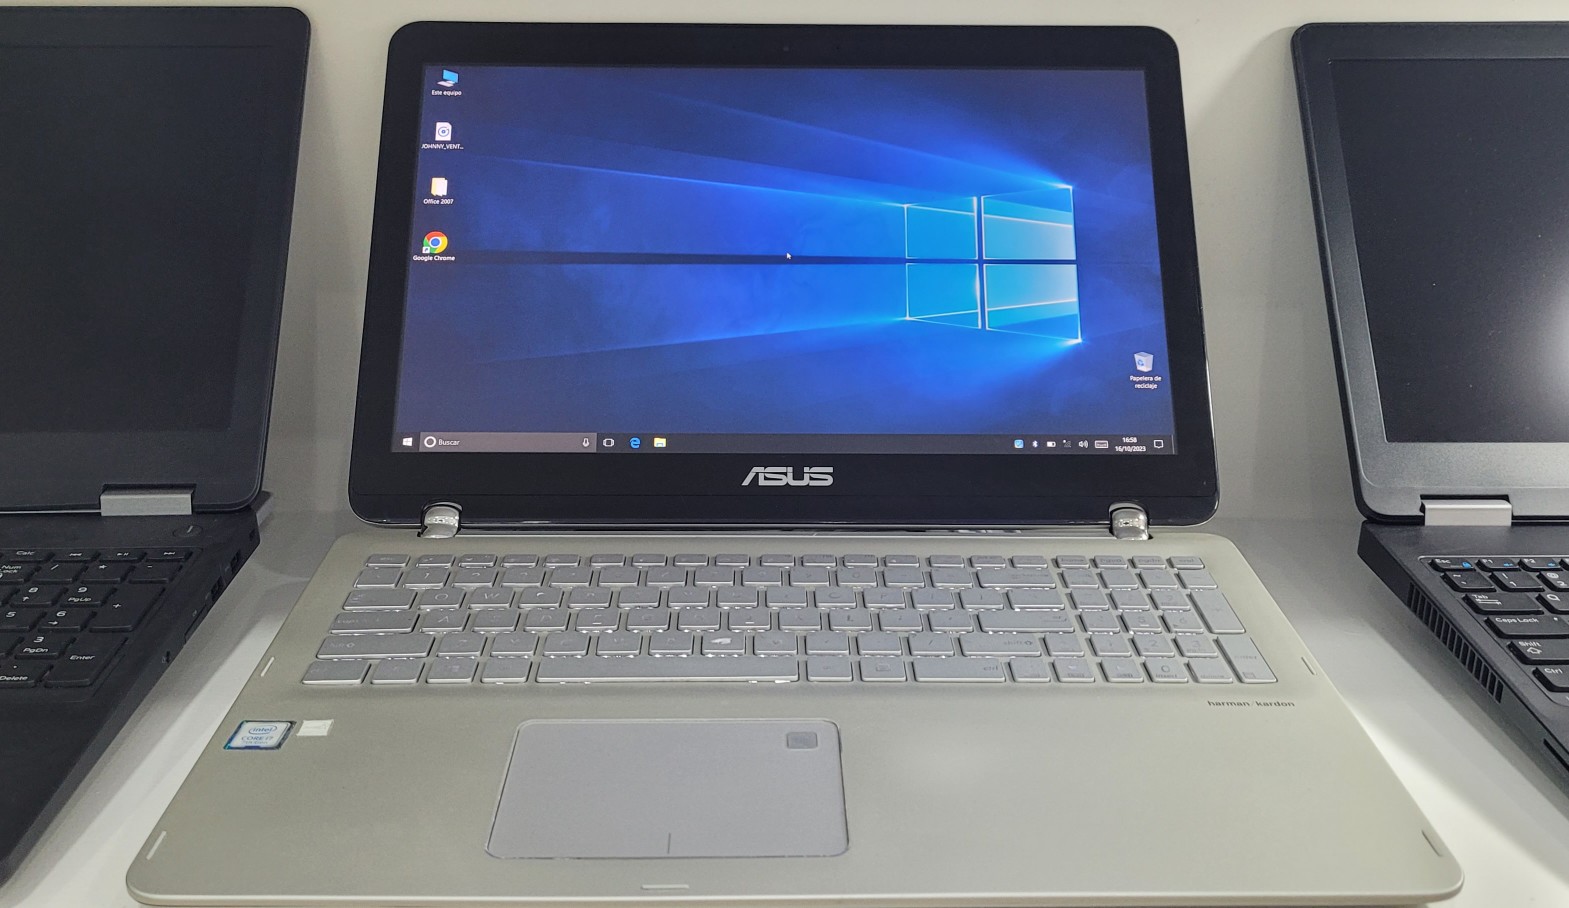 computadoras y laptops - Laptop Asus Touch 17 Pulg Core i7 2.90ghz Ram 16gb ddr4 Disco 512gb video 8gb 0